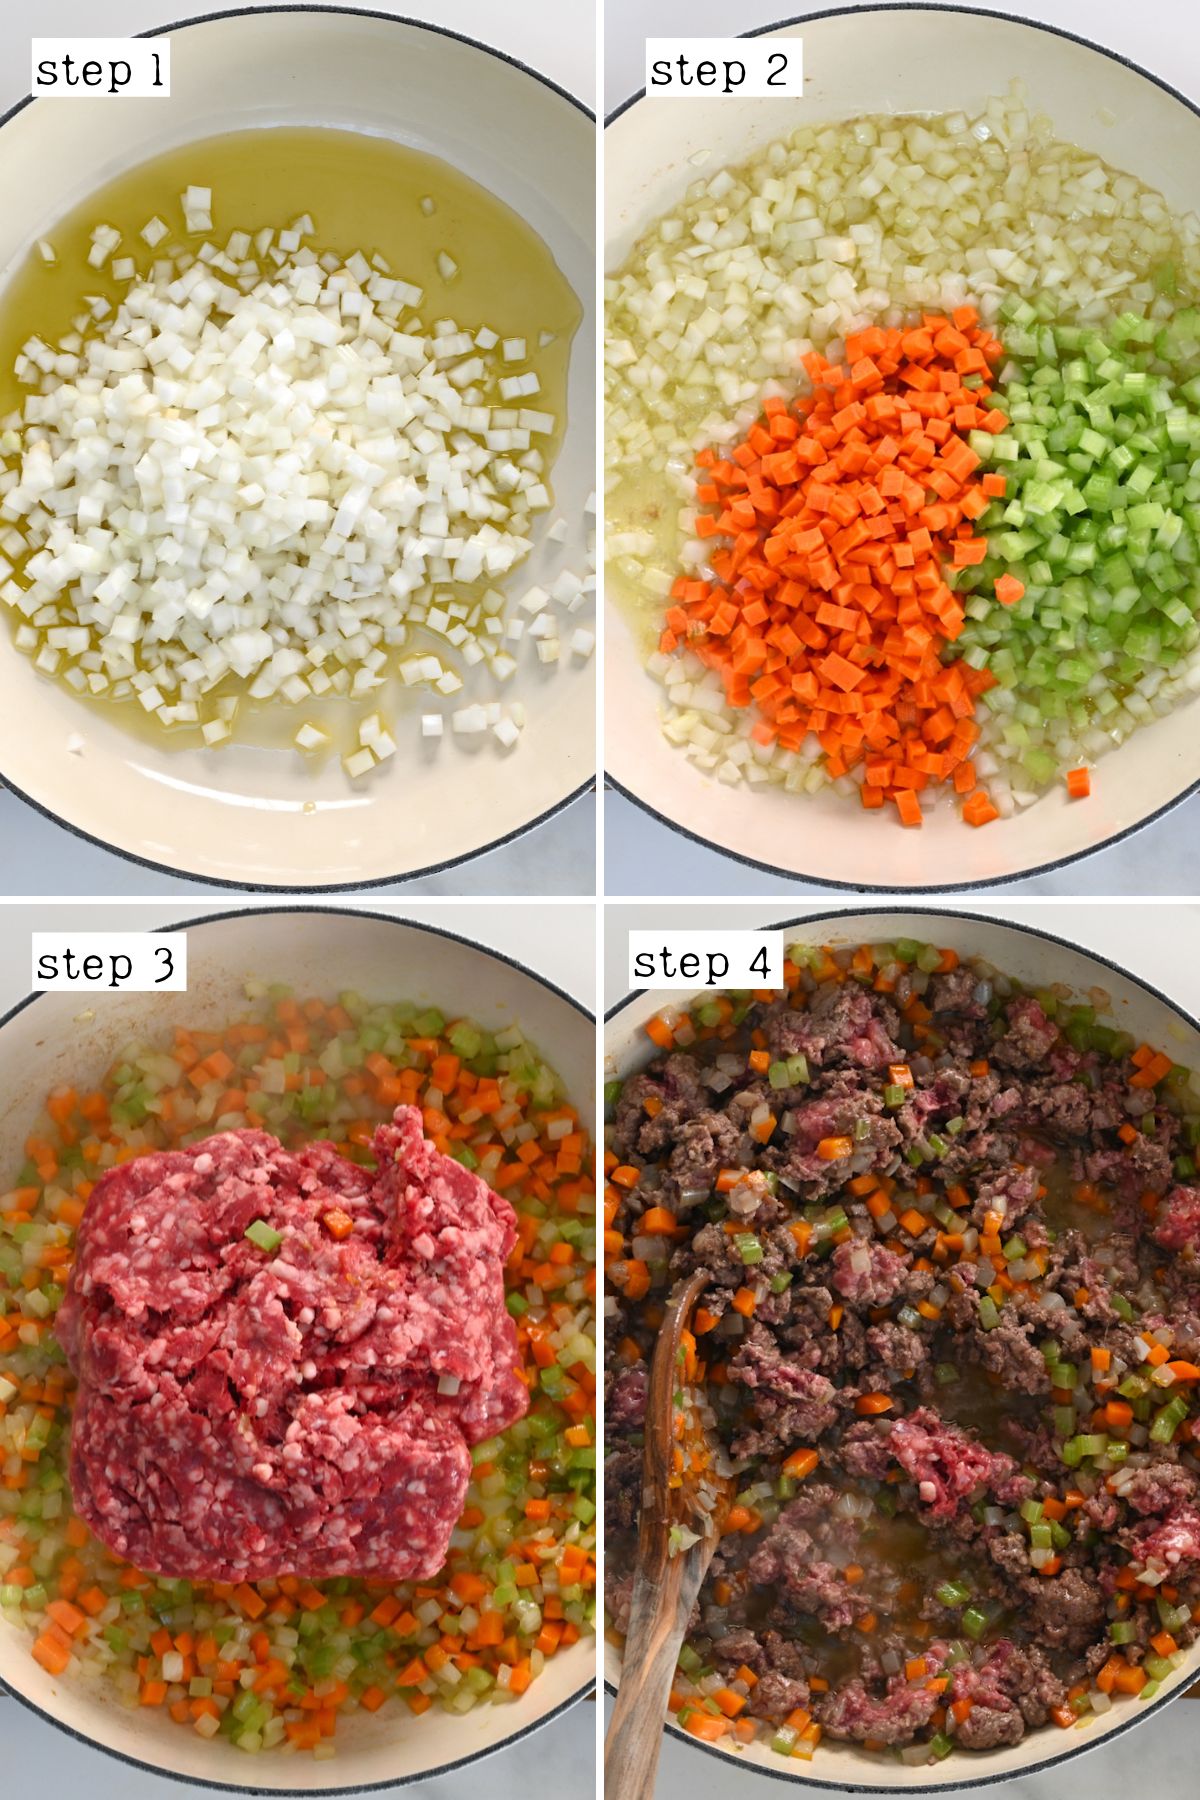 Steps for preparing sofrito and beef